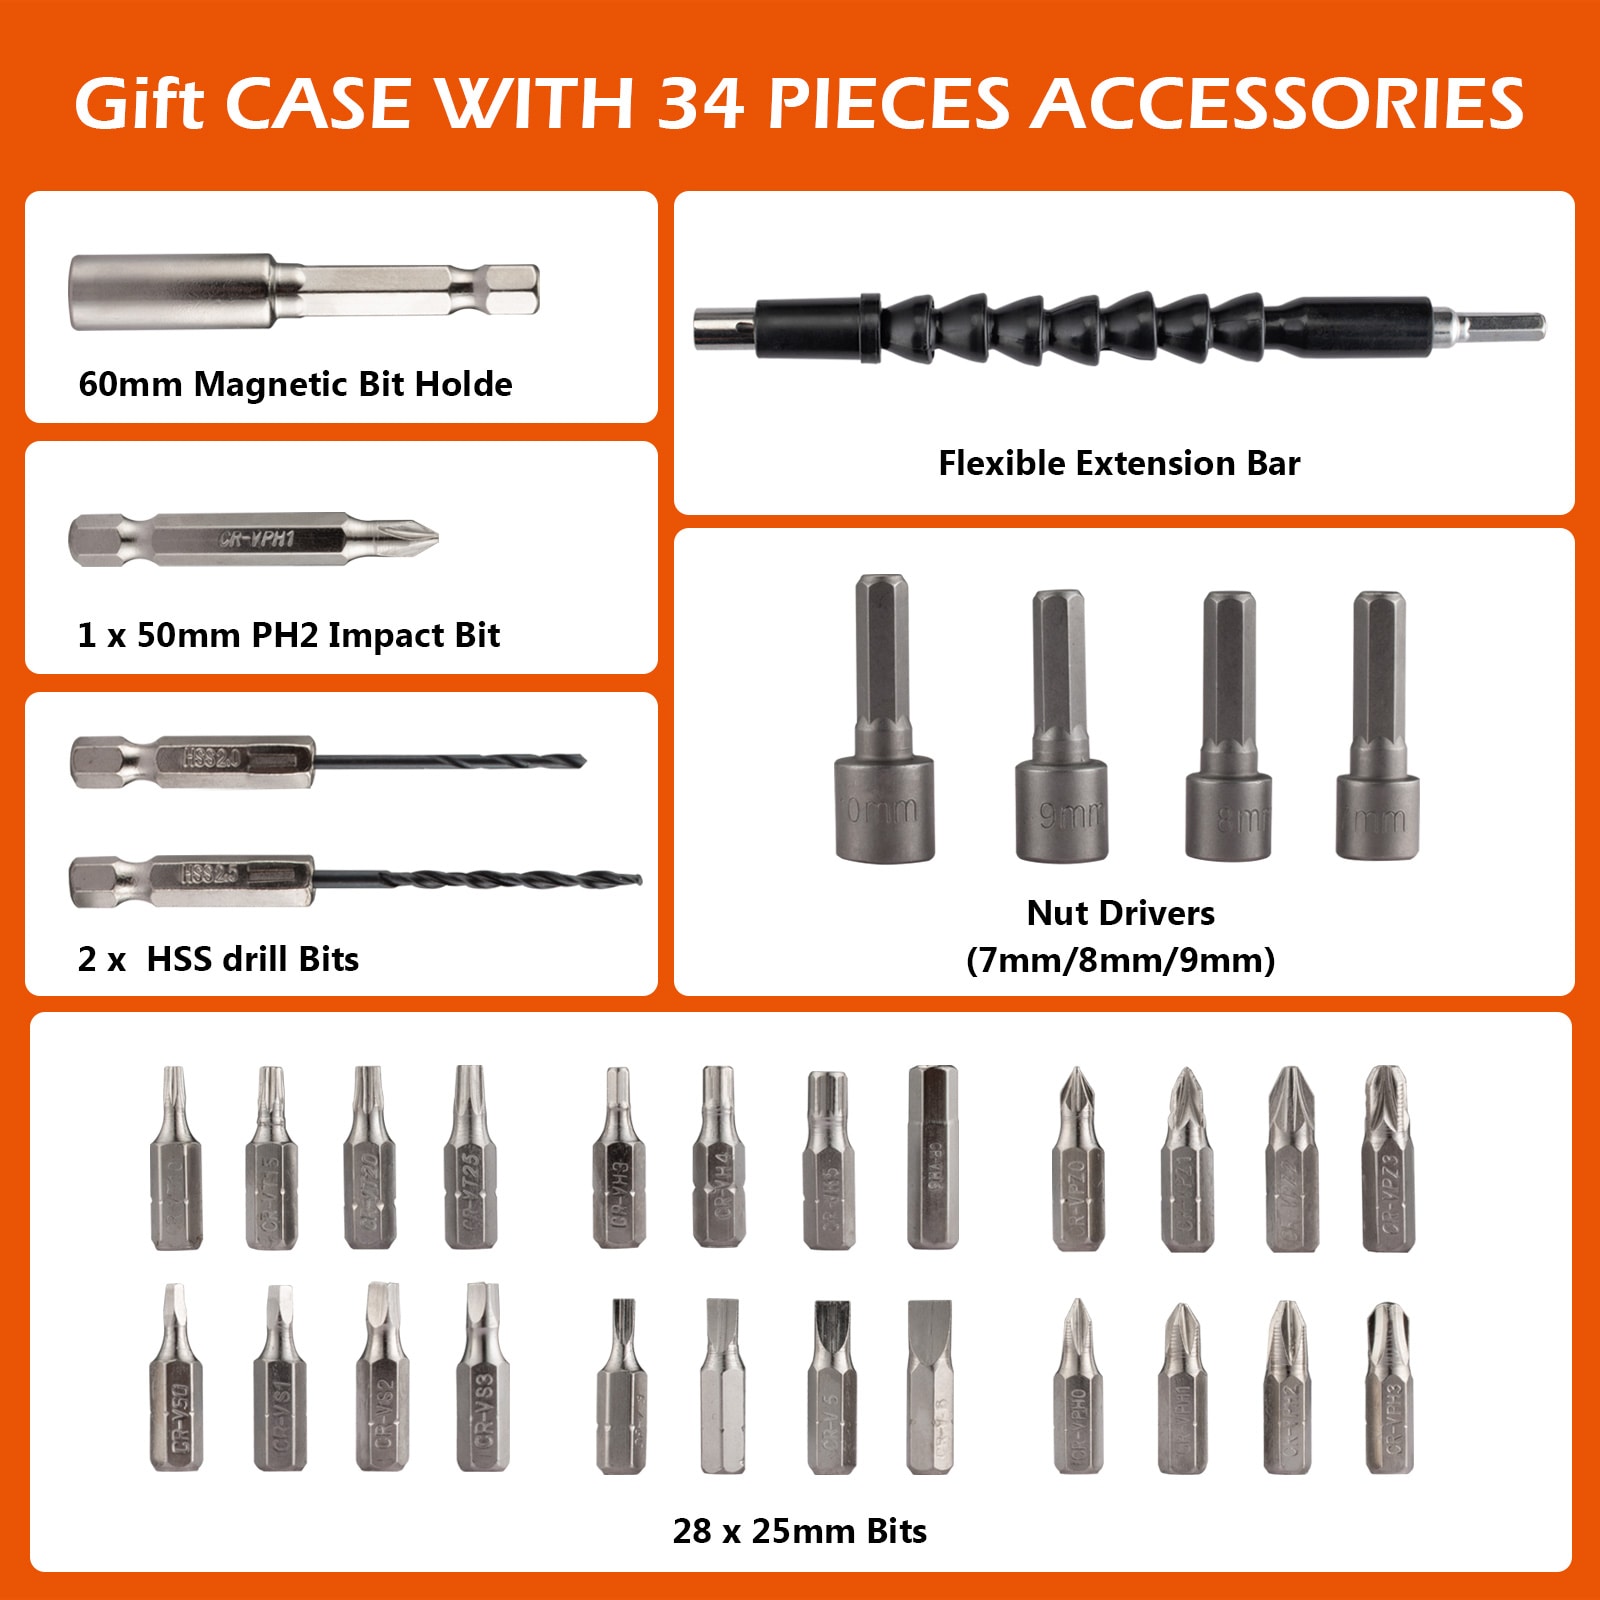 FREEMAN Interchangeable Attachments, Hex Bits, and Case 5-in-1